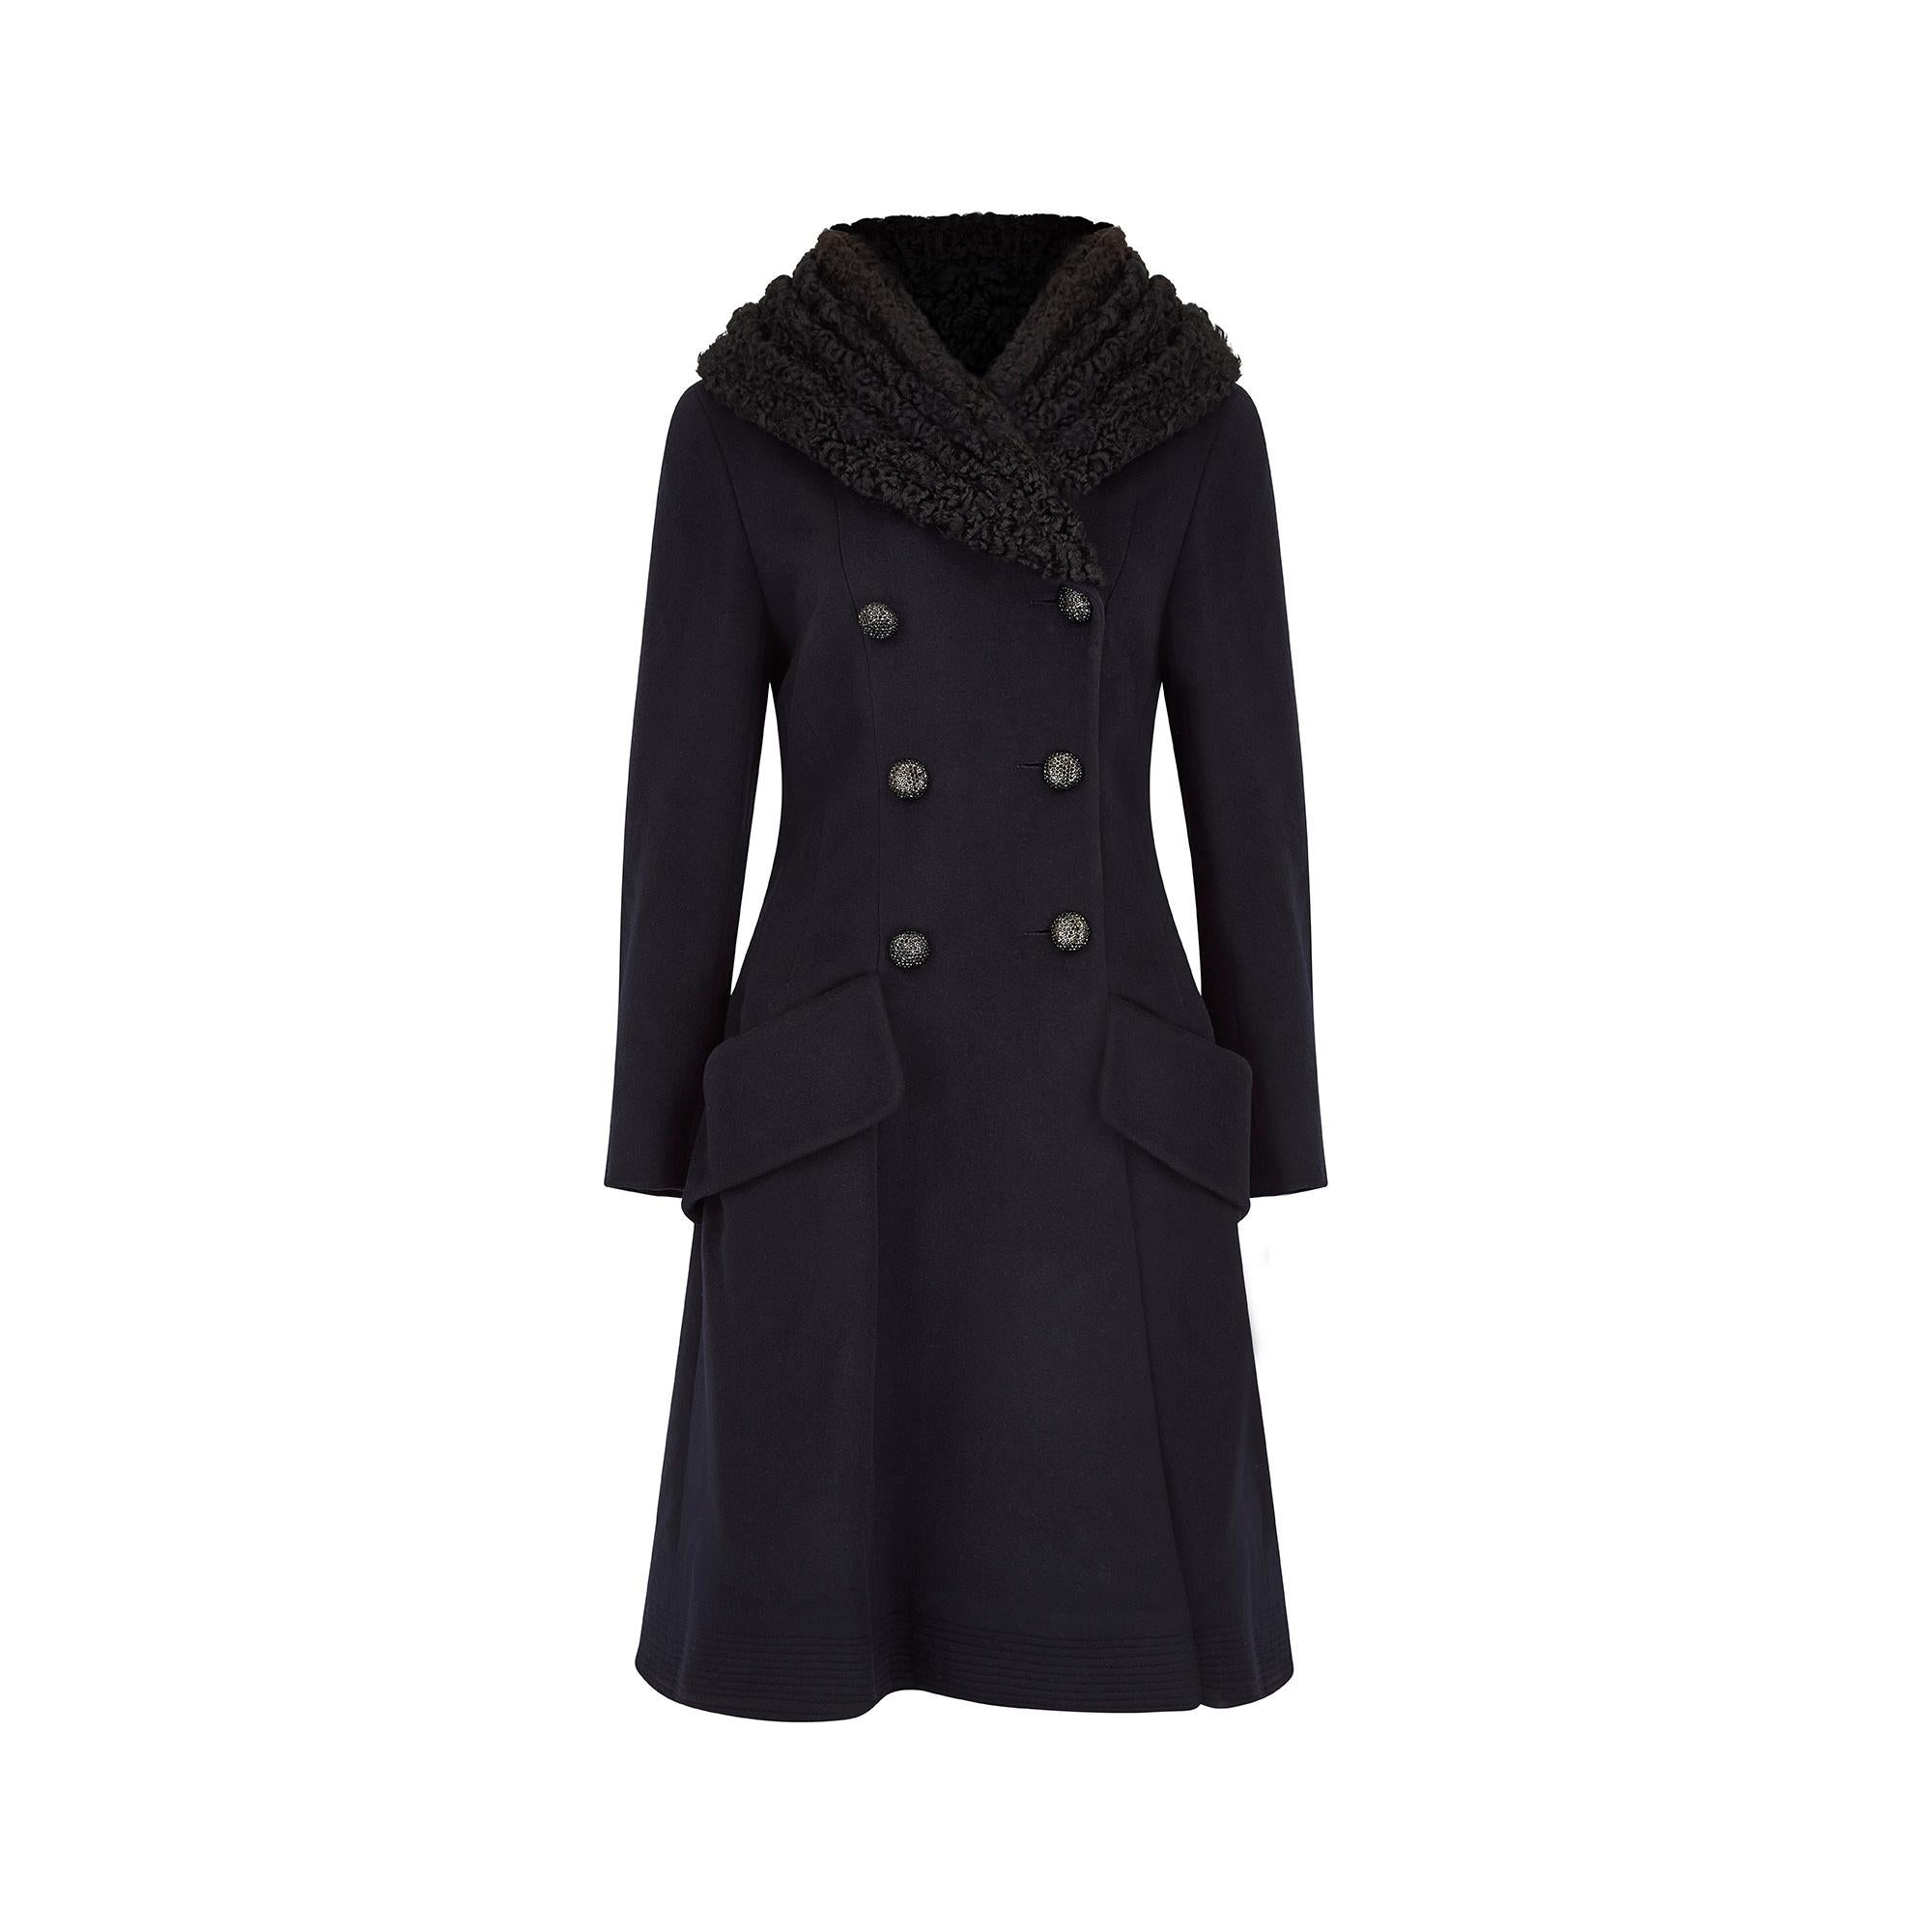 This late 2000s to mid 2010s Chanel coat is made from a luxuriously soft midnight navy cashmere, with a wide black Persian lamb collar. It has a double breasted front fastening, complete with six rounded black diamante buttons, each featuring the